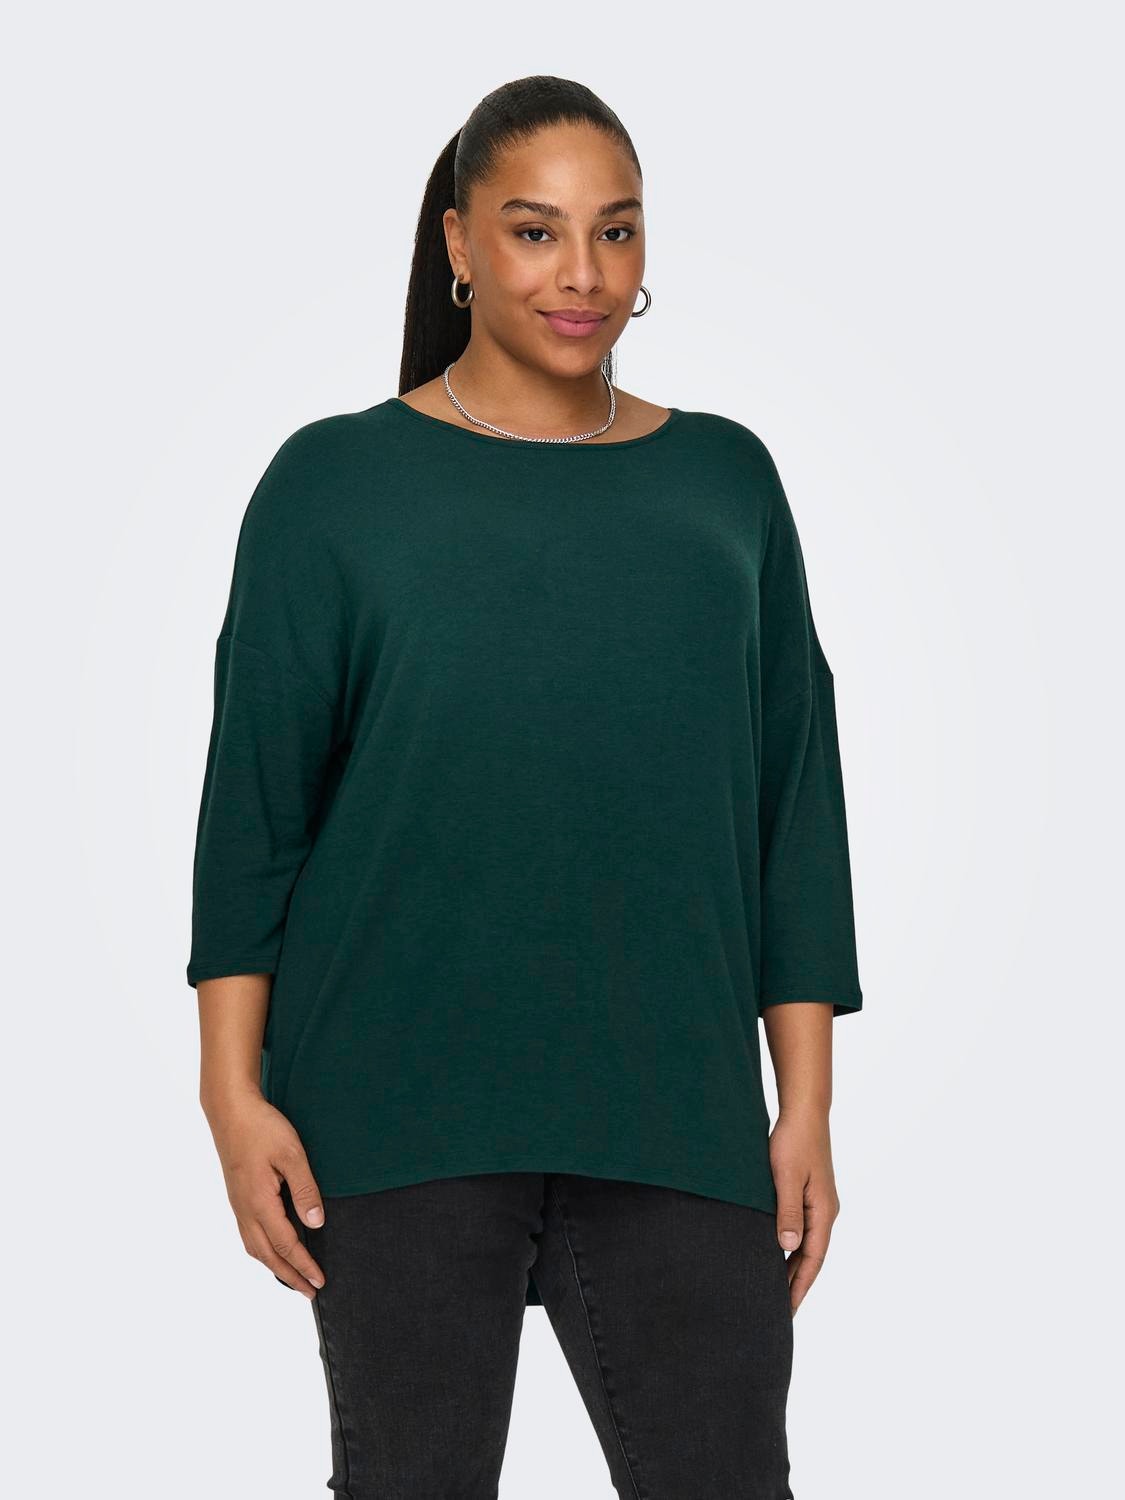 ONLY Curvy loose fit Top met 3/4 mouwen -Green Gables - 15229806